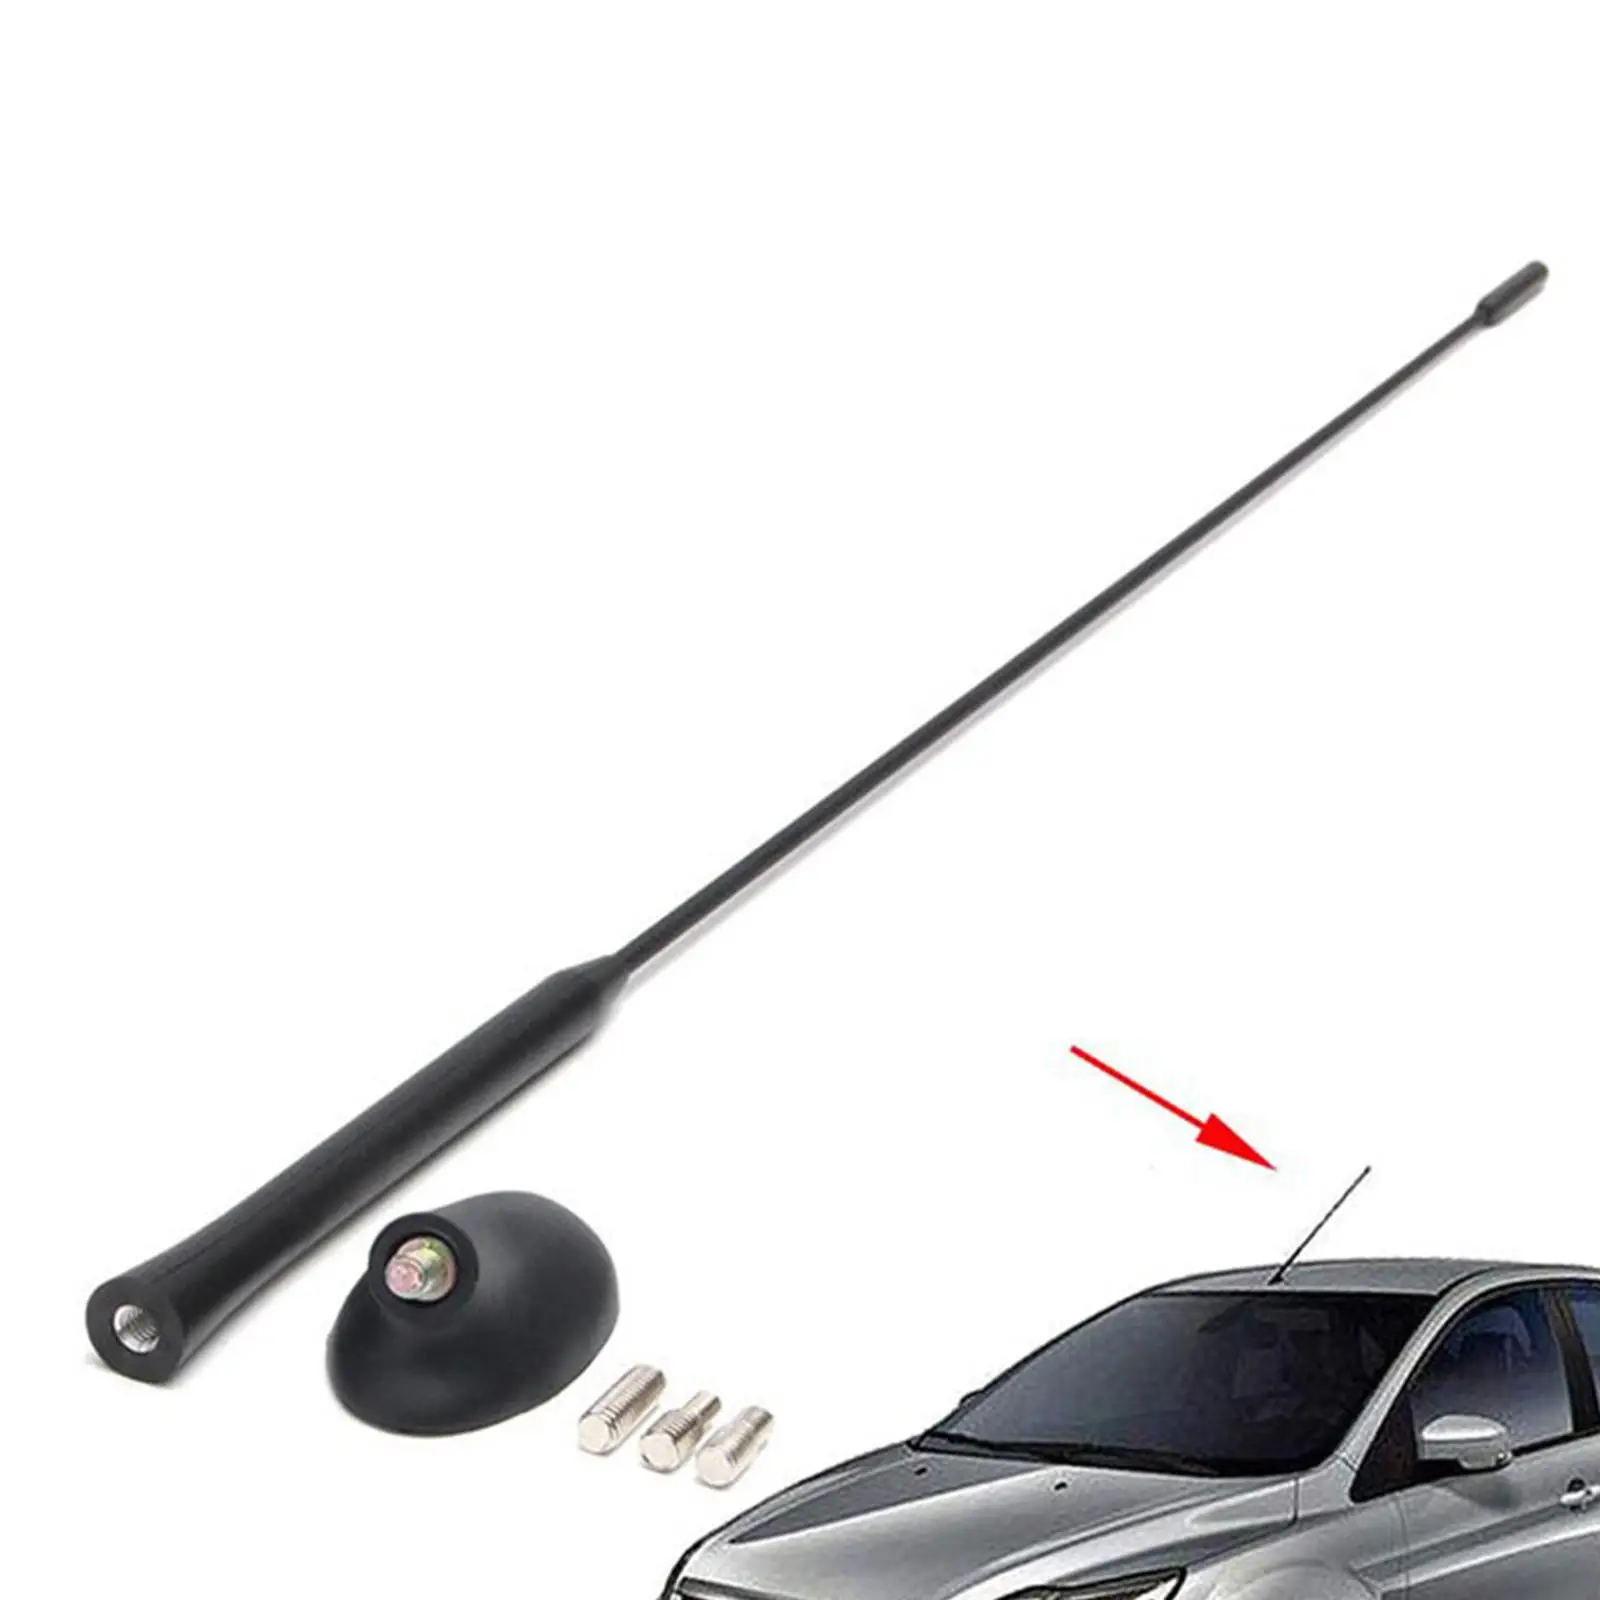 Car Radio Antenna AM/FM Automobiles with Base Easy Installation Roof Mount with 3 Screws Antenna Mast for 00-07